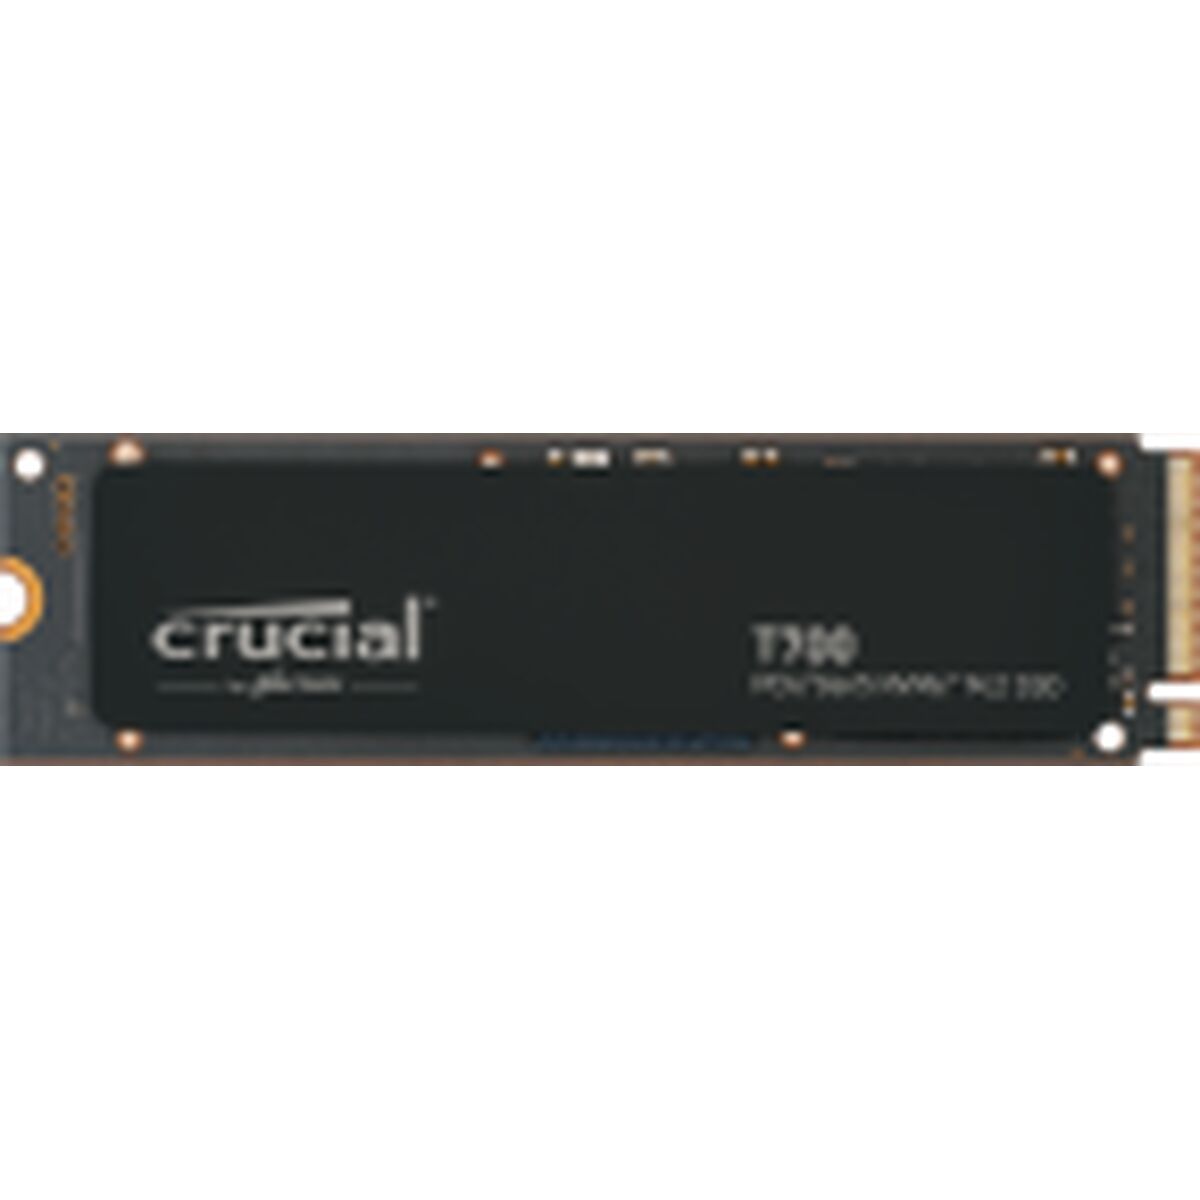 Hard Drive Crucial T700  2 TB 2 TB SSD, Crucial, Computing, Data storage, hard-drive-crucial-t700-2-tb-2-tb-ssd-1, Brand_Crucial, category-reference-2609, category-reference-2803, category-reference-2806, category-reference-t-19685, category-reference-t-19909, category-reference-t-21357, category-reference-t-25638, computers / components, Condition_NEW, Price_300 - 400, Teleworking, RiotNook